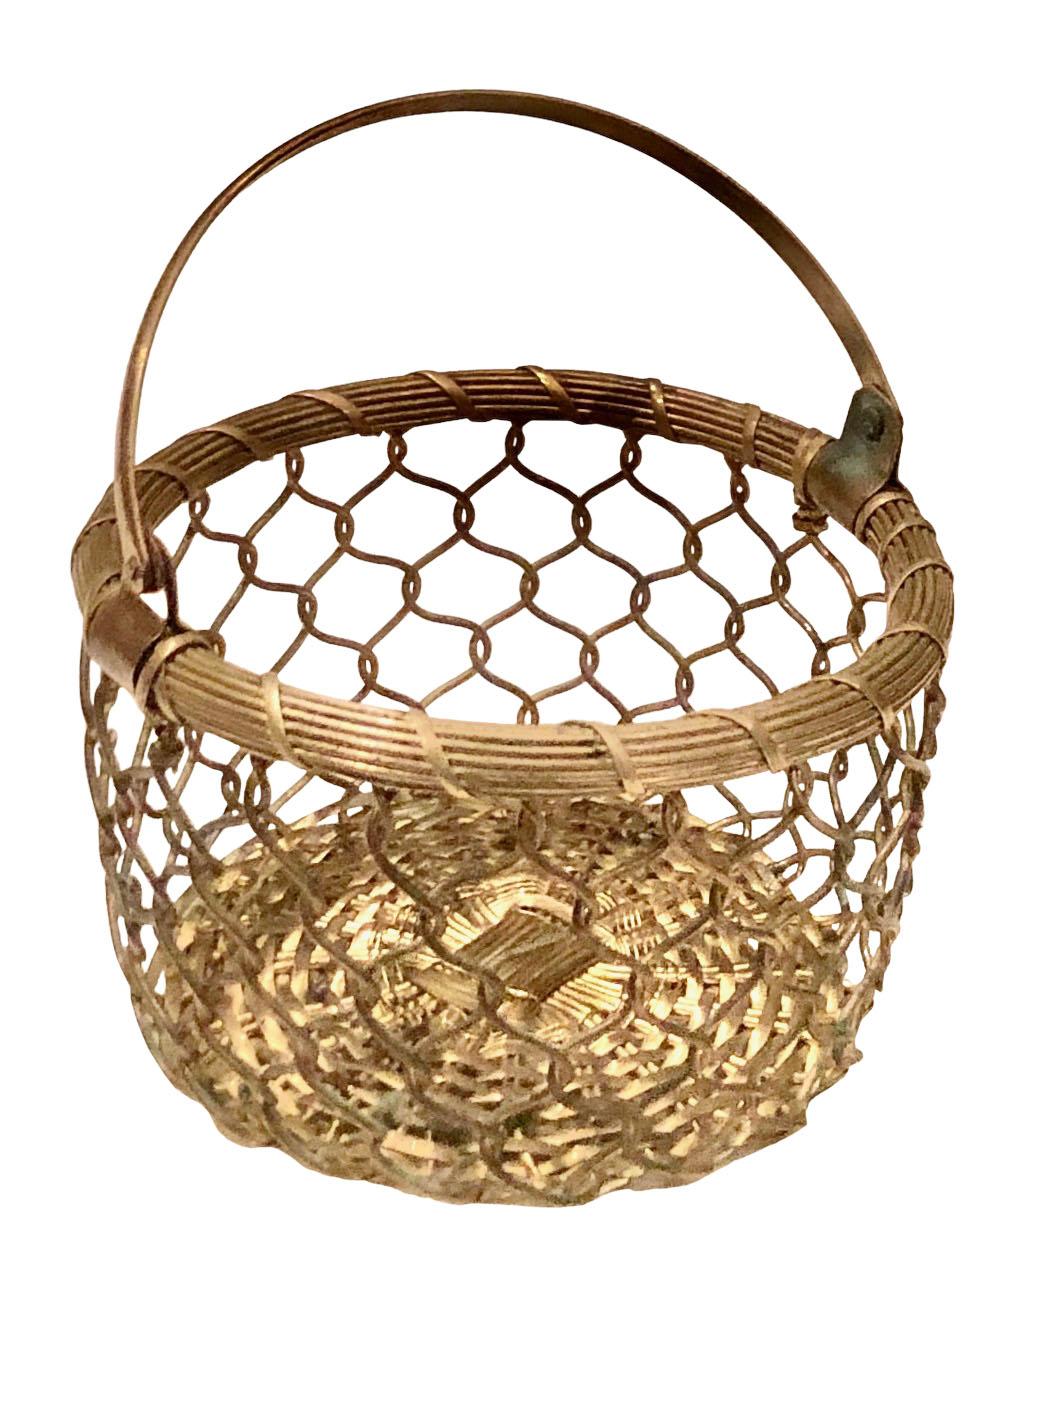 19th Century French Bronze Basket In Good Condition For Sale In Tampa, FL